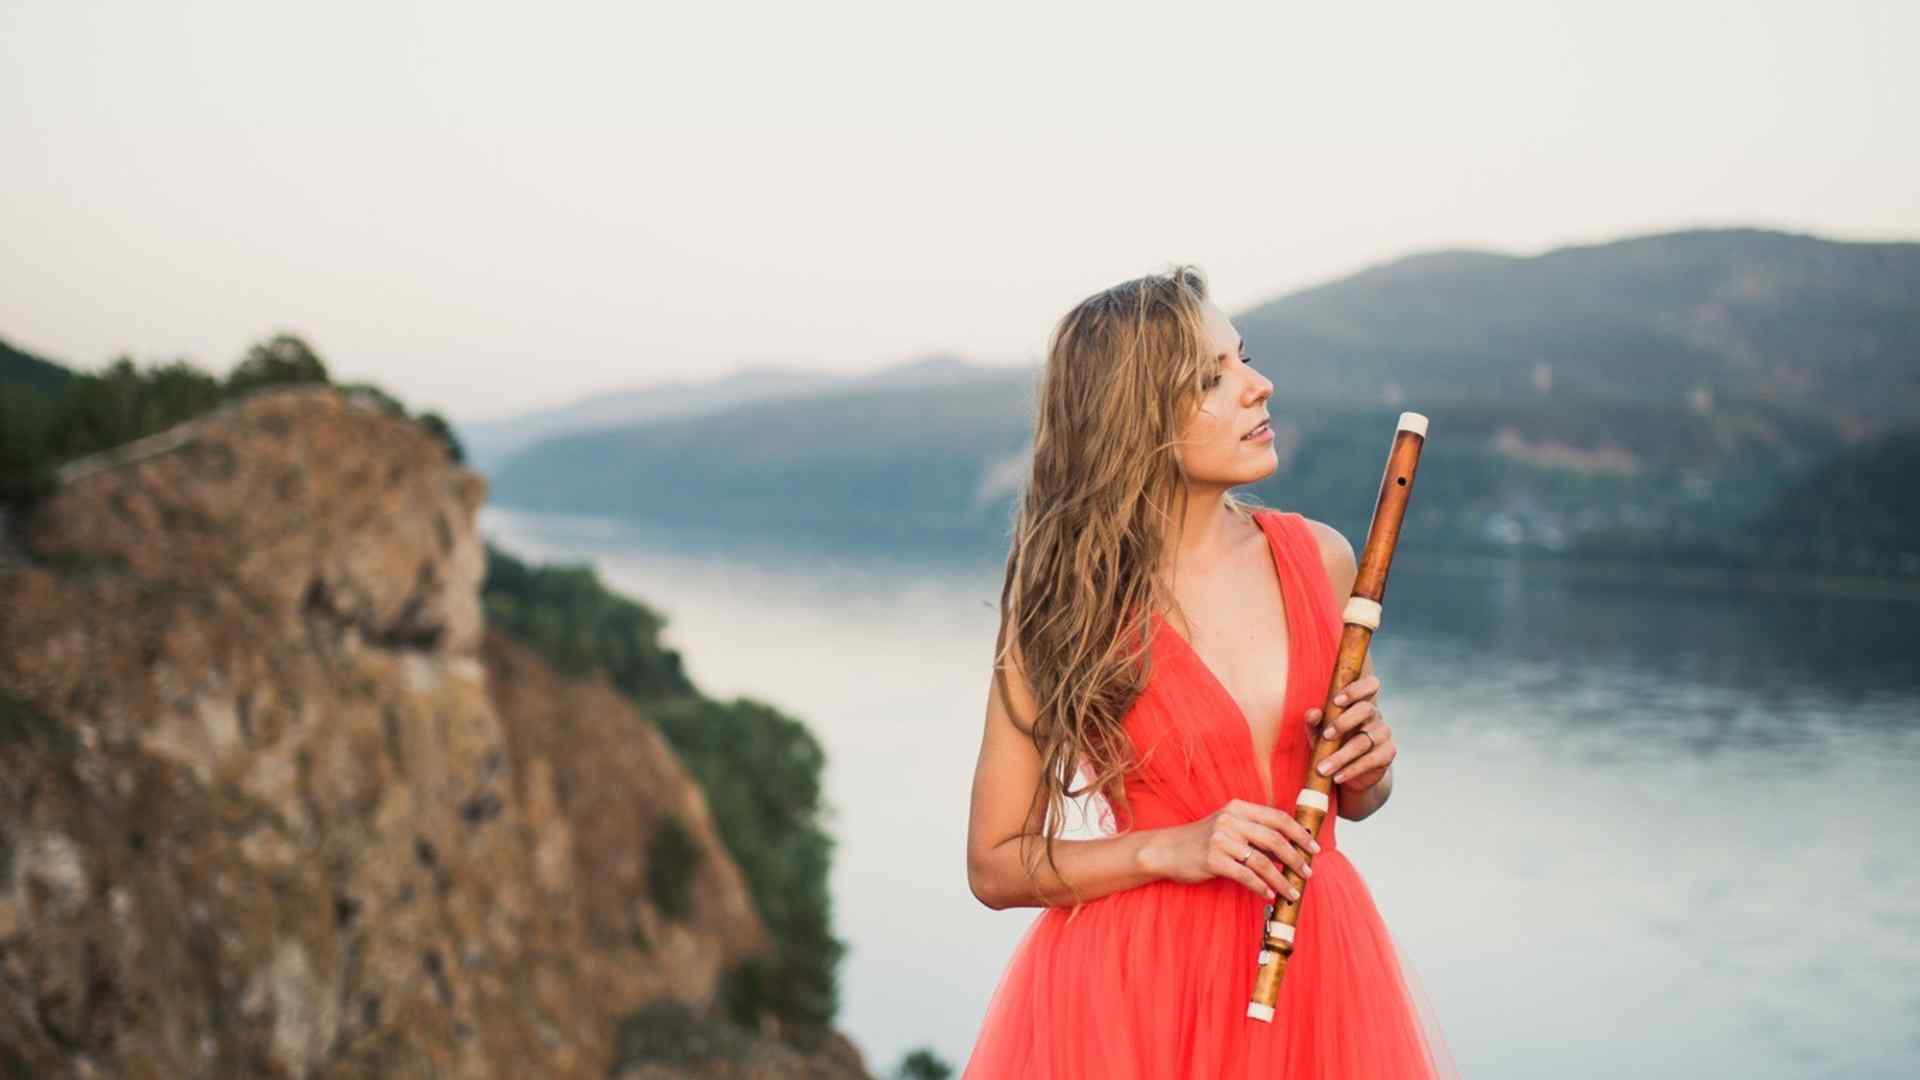 Taya with her flute